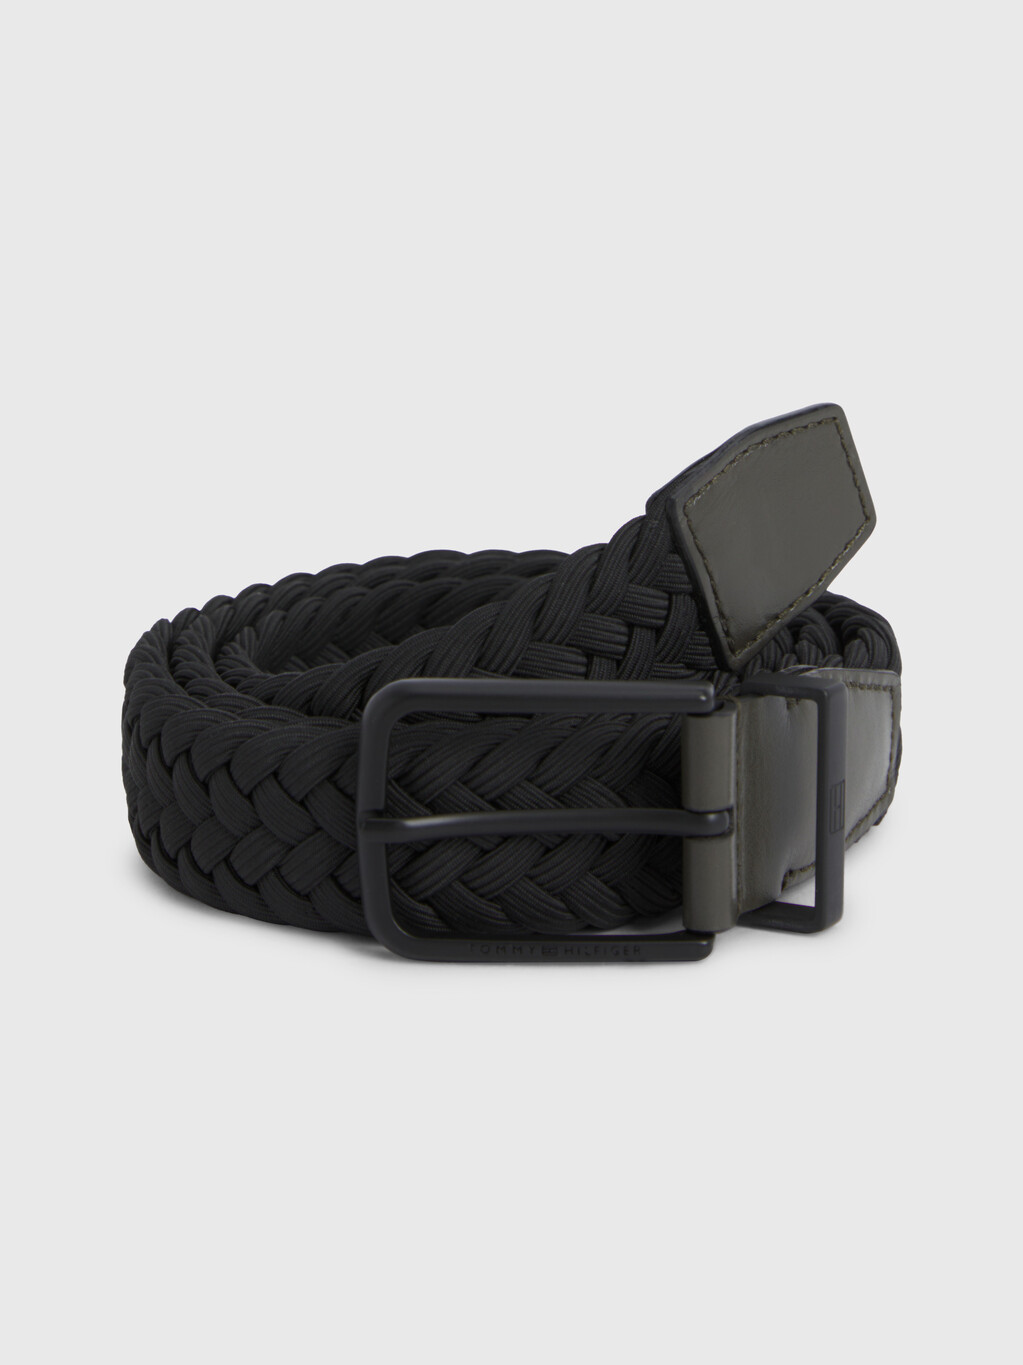 TH Tech Braided Belt | Tommy Singapore